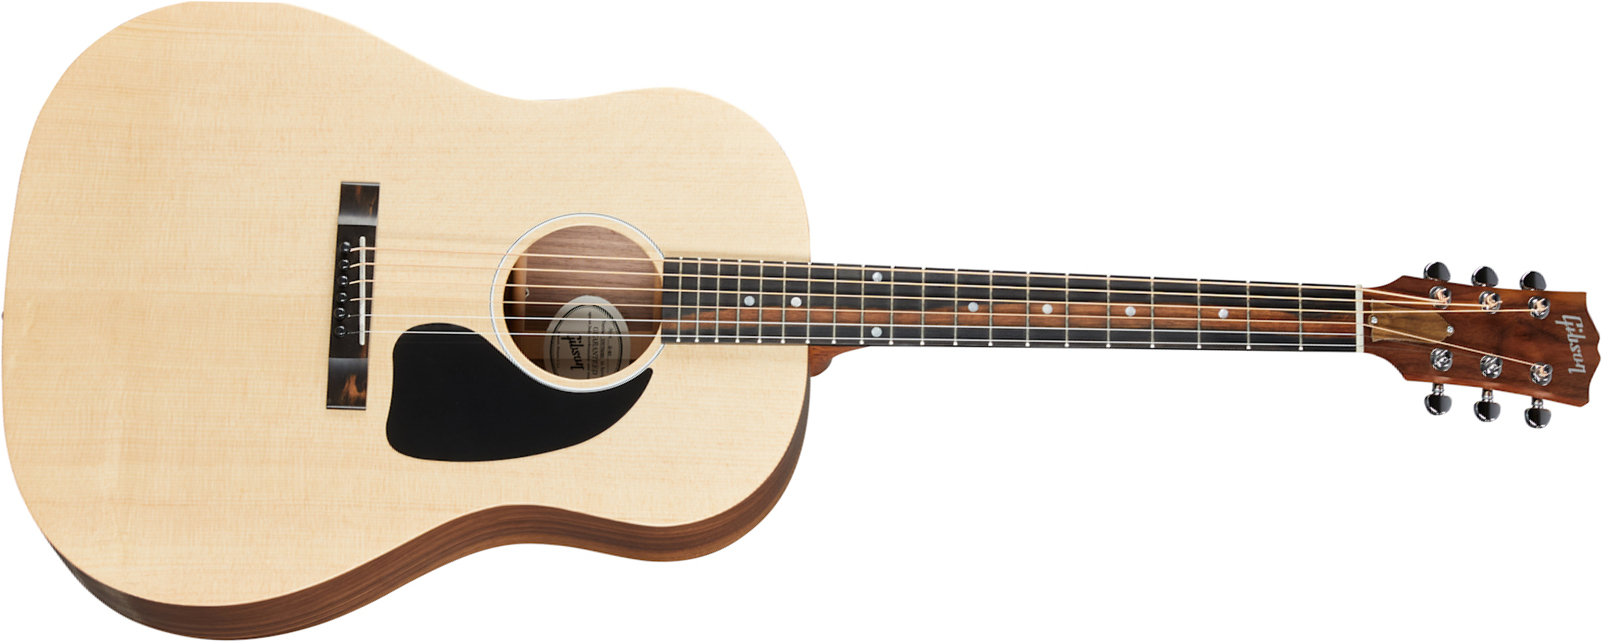 Gibson G-45 Modern Dreadnought Epicea Noyer Wal Eb - Natural Satin - Acoustic guitar & electro - Main picture